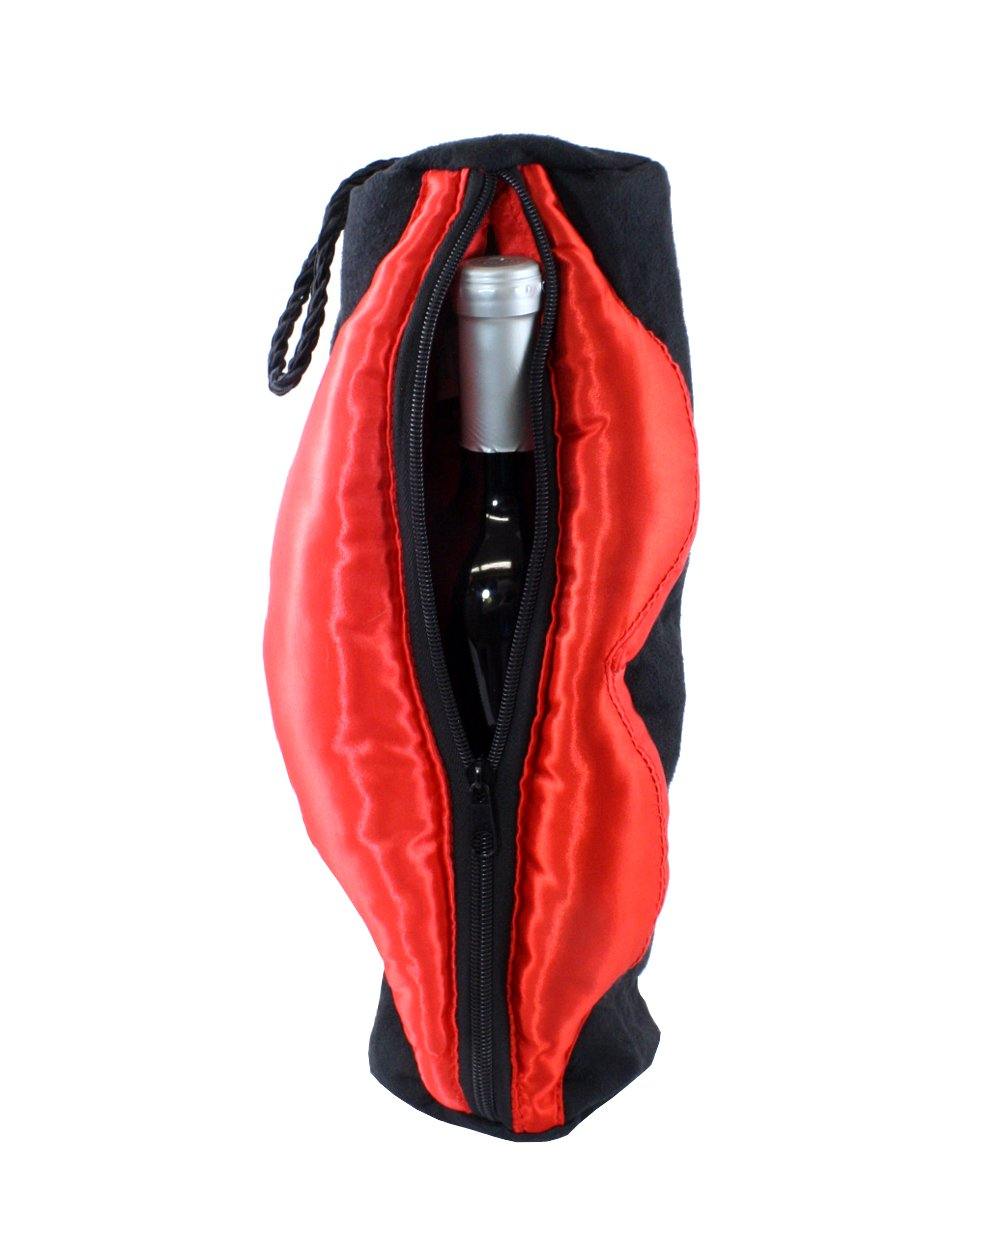 Lips Tote for Wine and Spirit Bottles, insulated and zipper closure